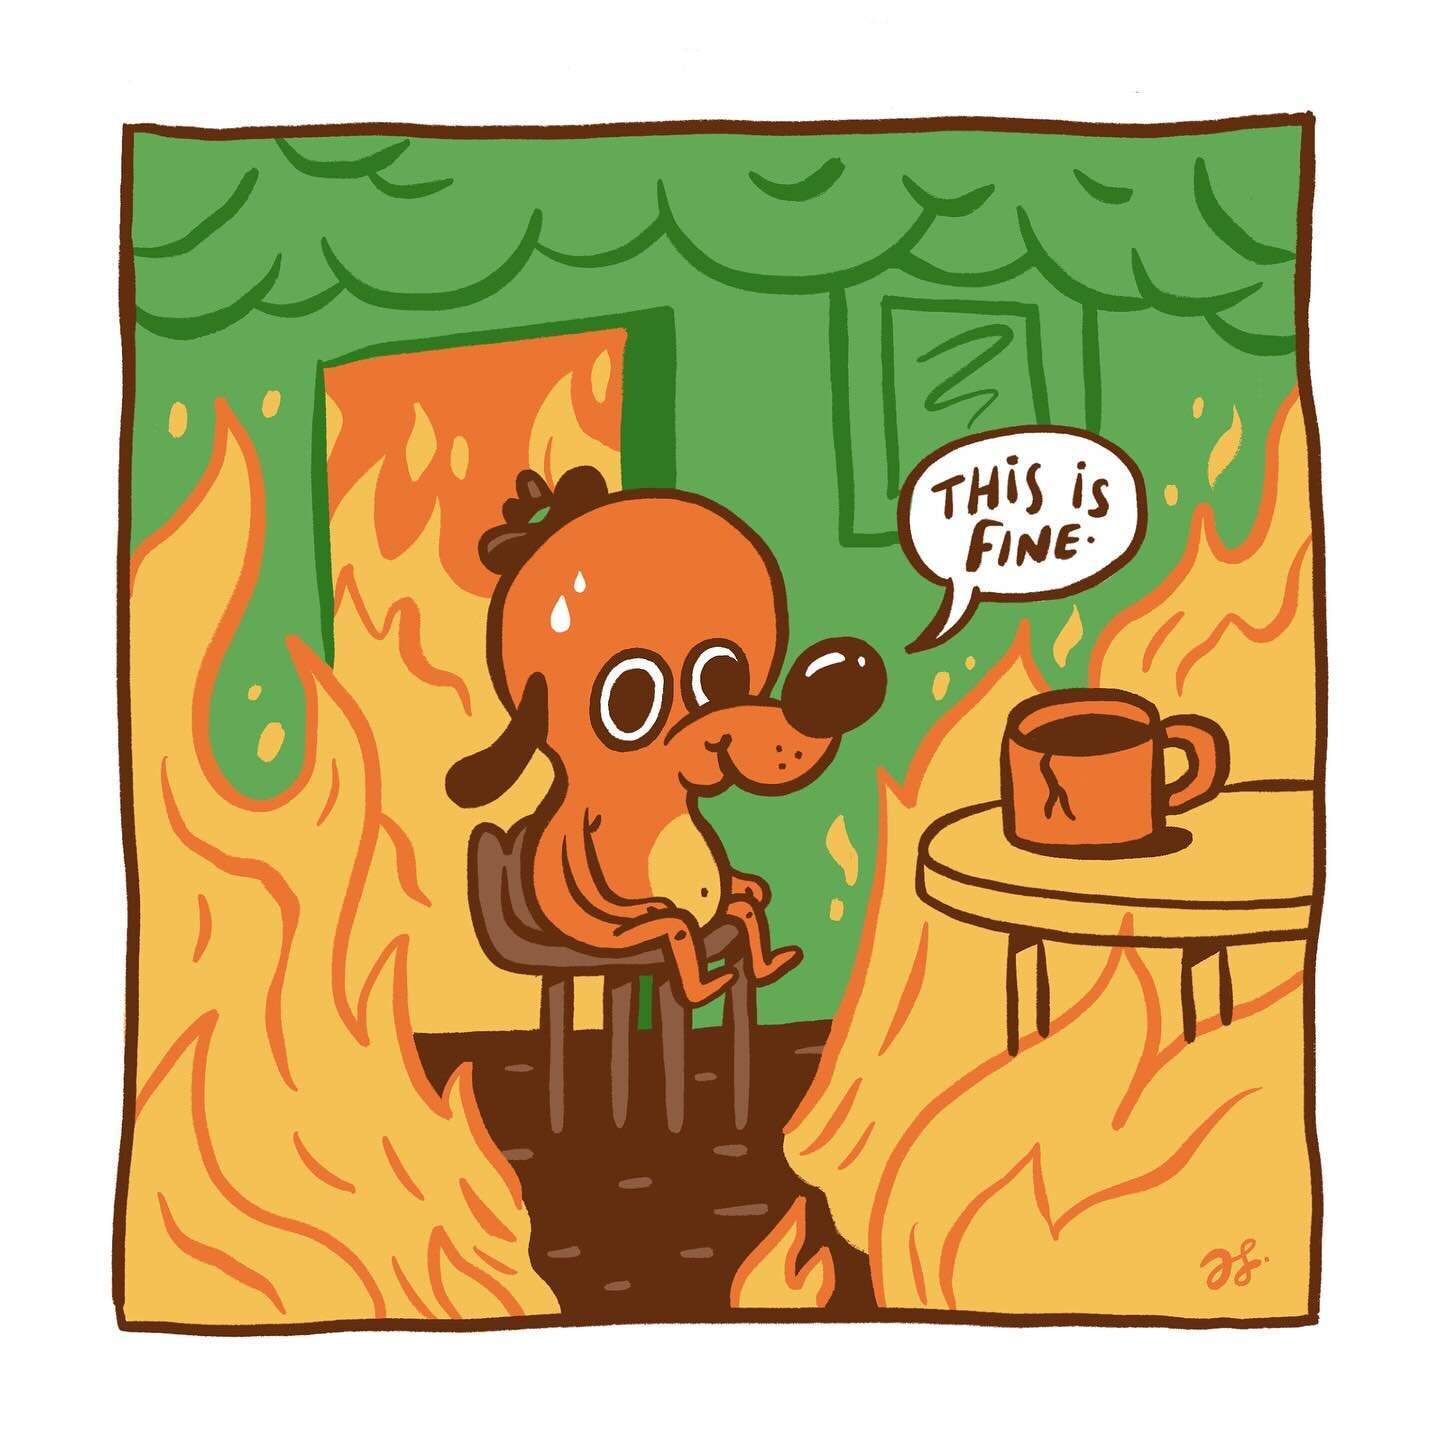 Sometimes you just gotta redraw your favourite meme. 

Love the colours too. And his totally checked out eyes. But always has his coffee on hand. 

I just get him. He is life. 

What&rsquo;s your fave meme? Smack in a gif below 👇 

#thisisfine #this